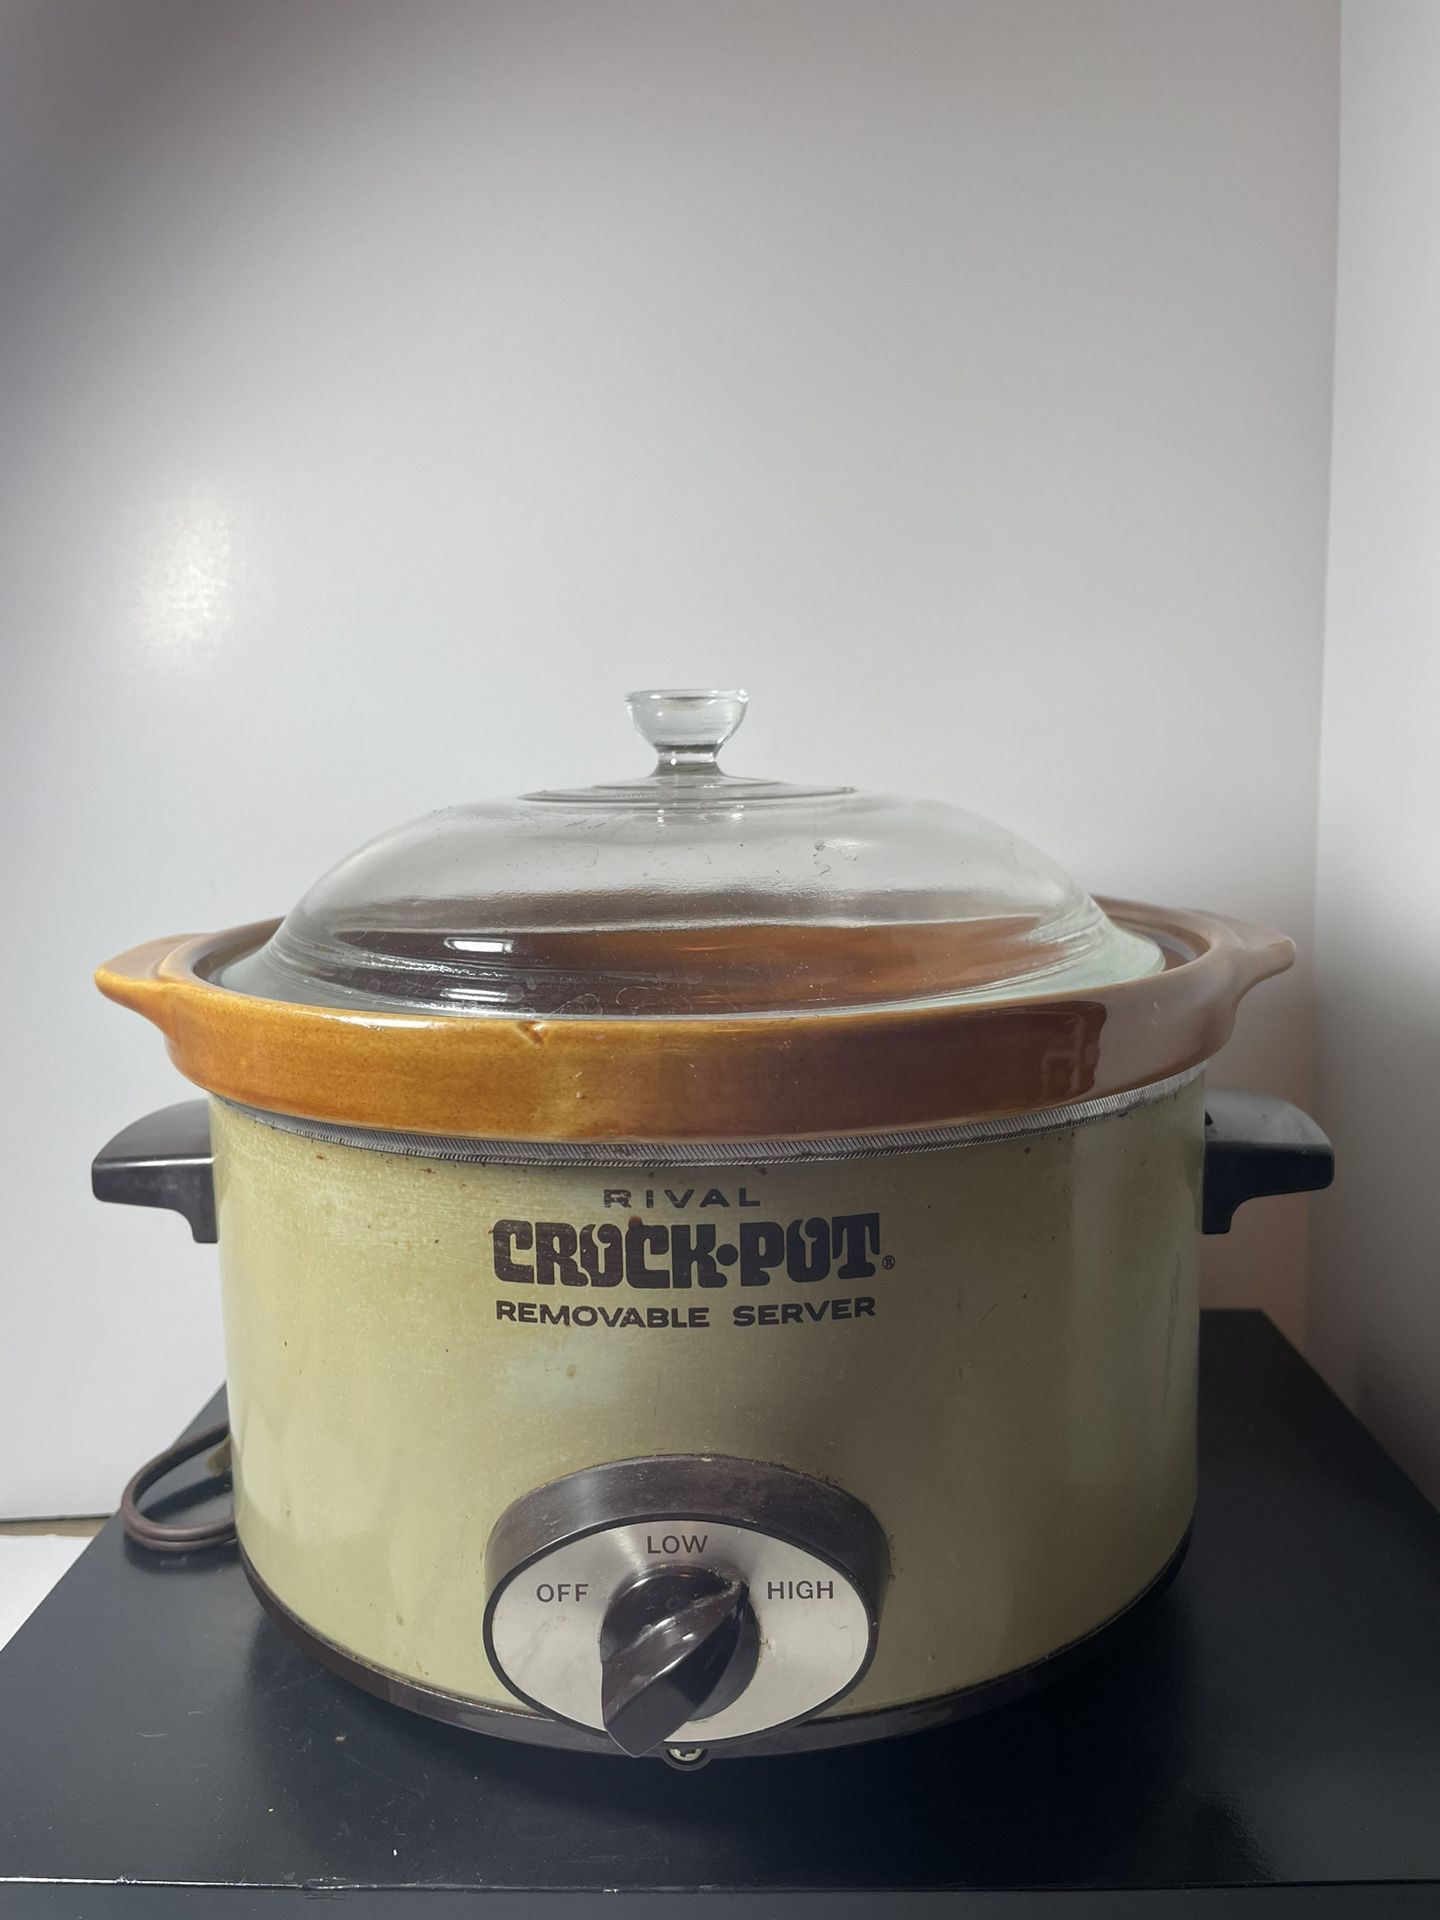 Vintage Rival Crock Pot Model 3154 Green Ivy Purple Flowers And Green  Stoneware Slow cooker In good condition for Sale in Cambridge, MA - OfferUp